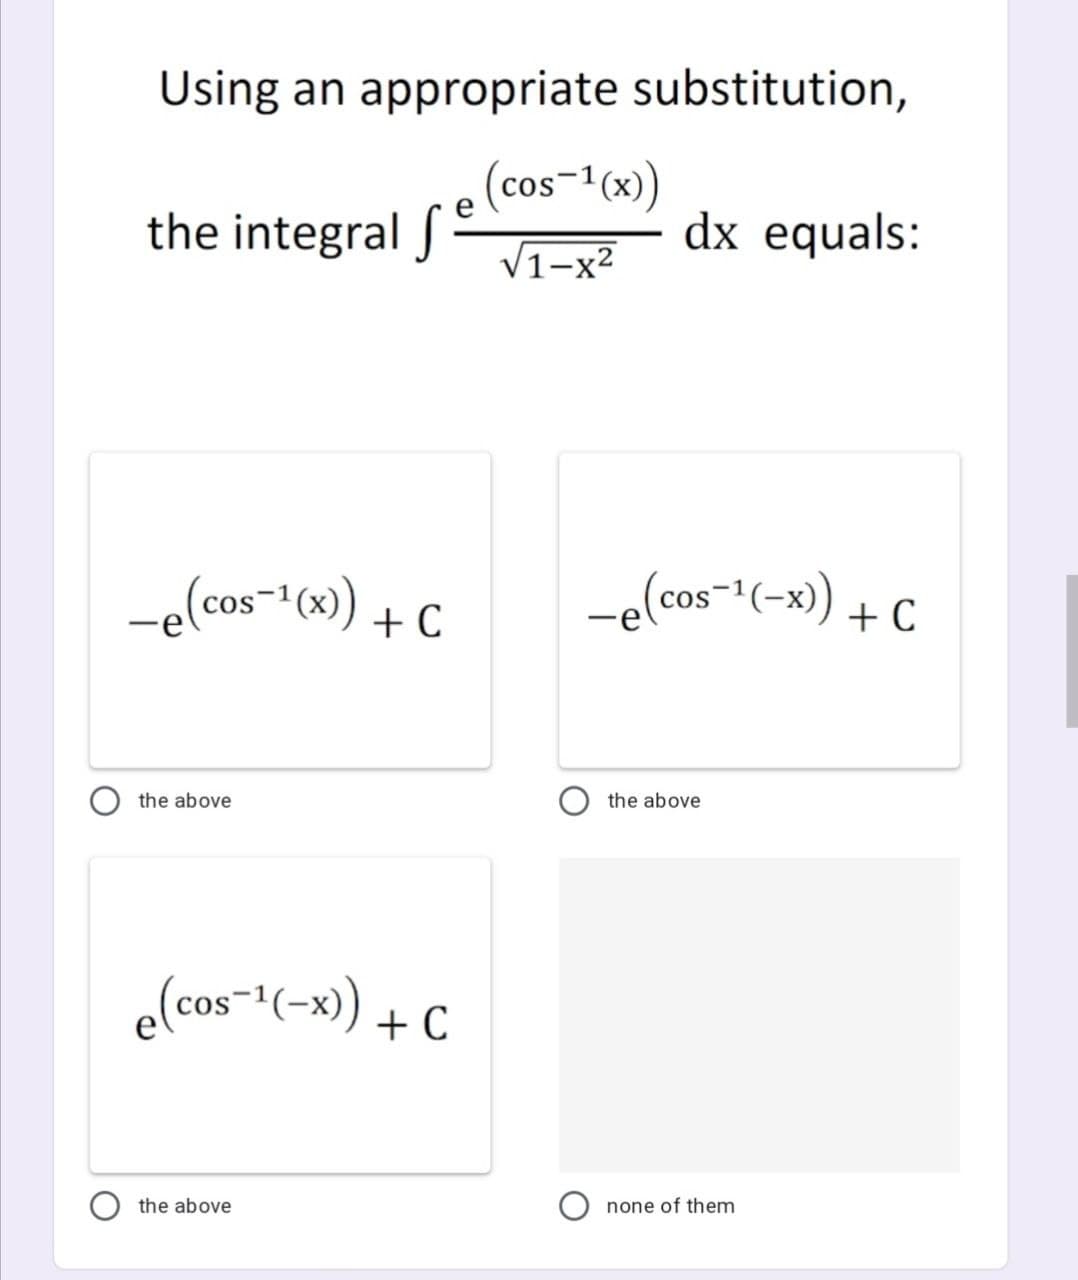 Using an appropriate substitution,
(cos-1 (x)
the integral S
dx equals:
V1-x2
-e(cos- (x)
-elcos-1(-x) + C
+ C
the above
the above
elcos-(-x) + C
the above
none of them
